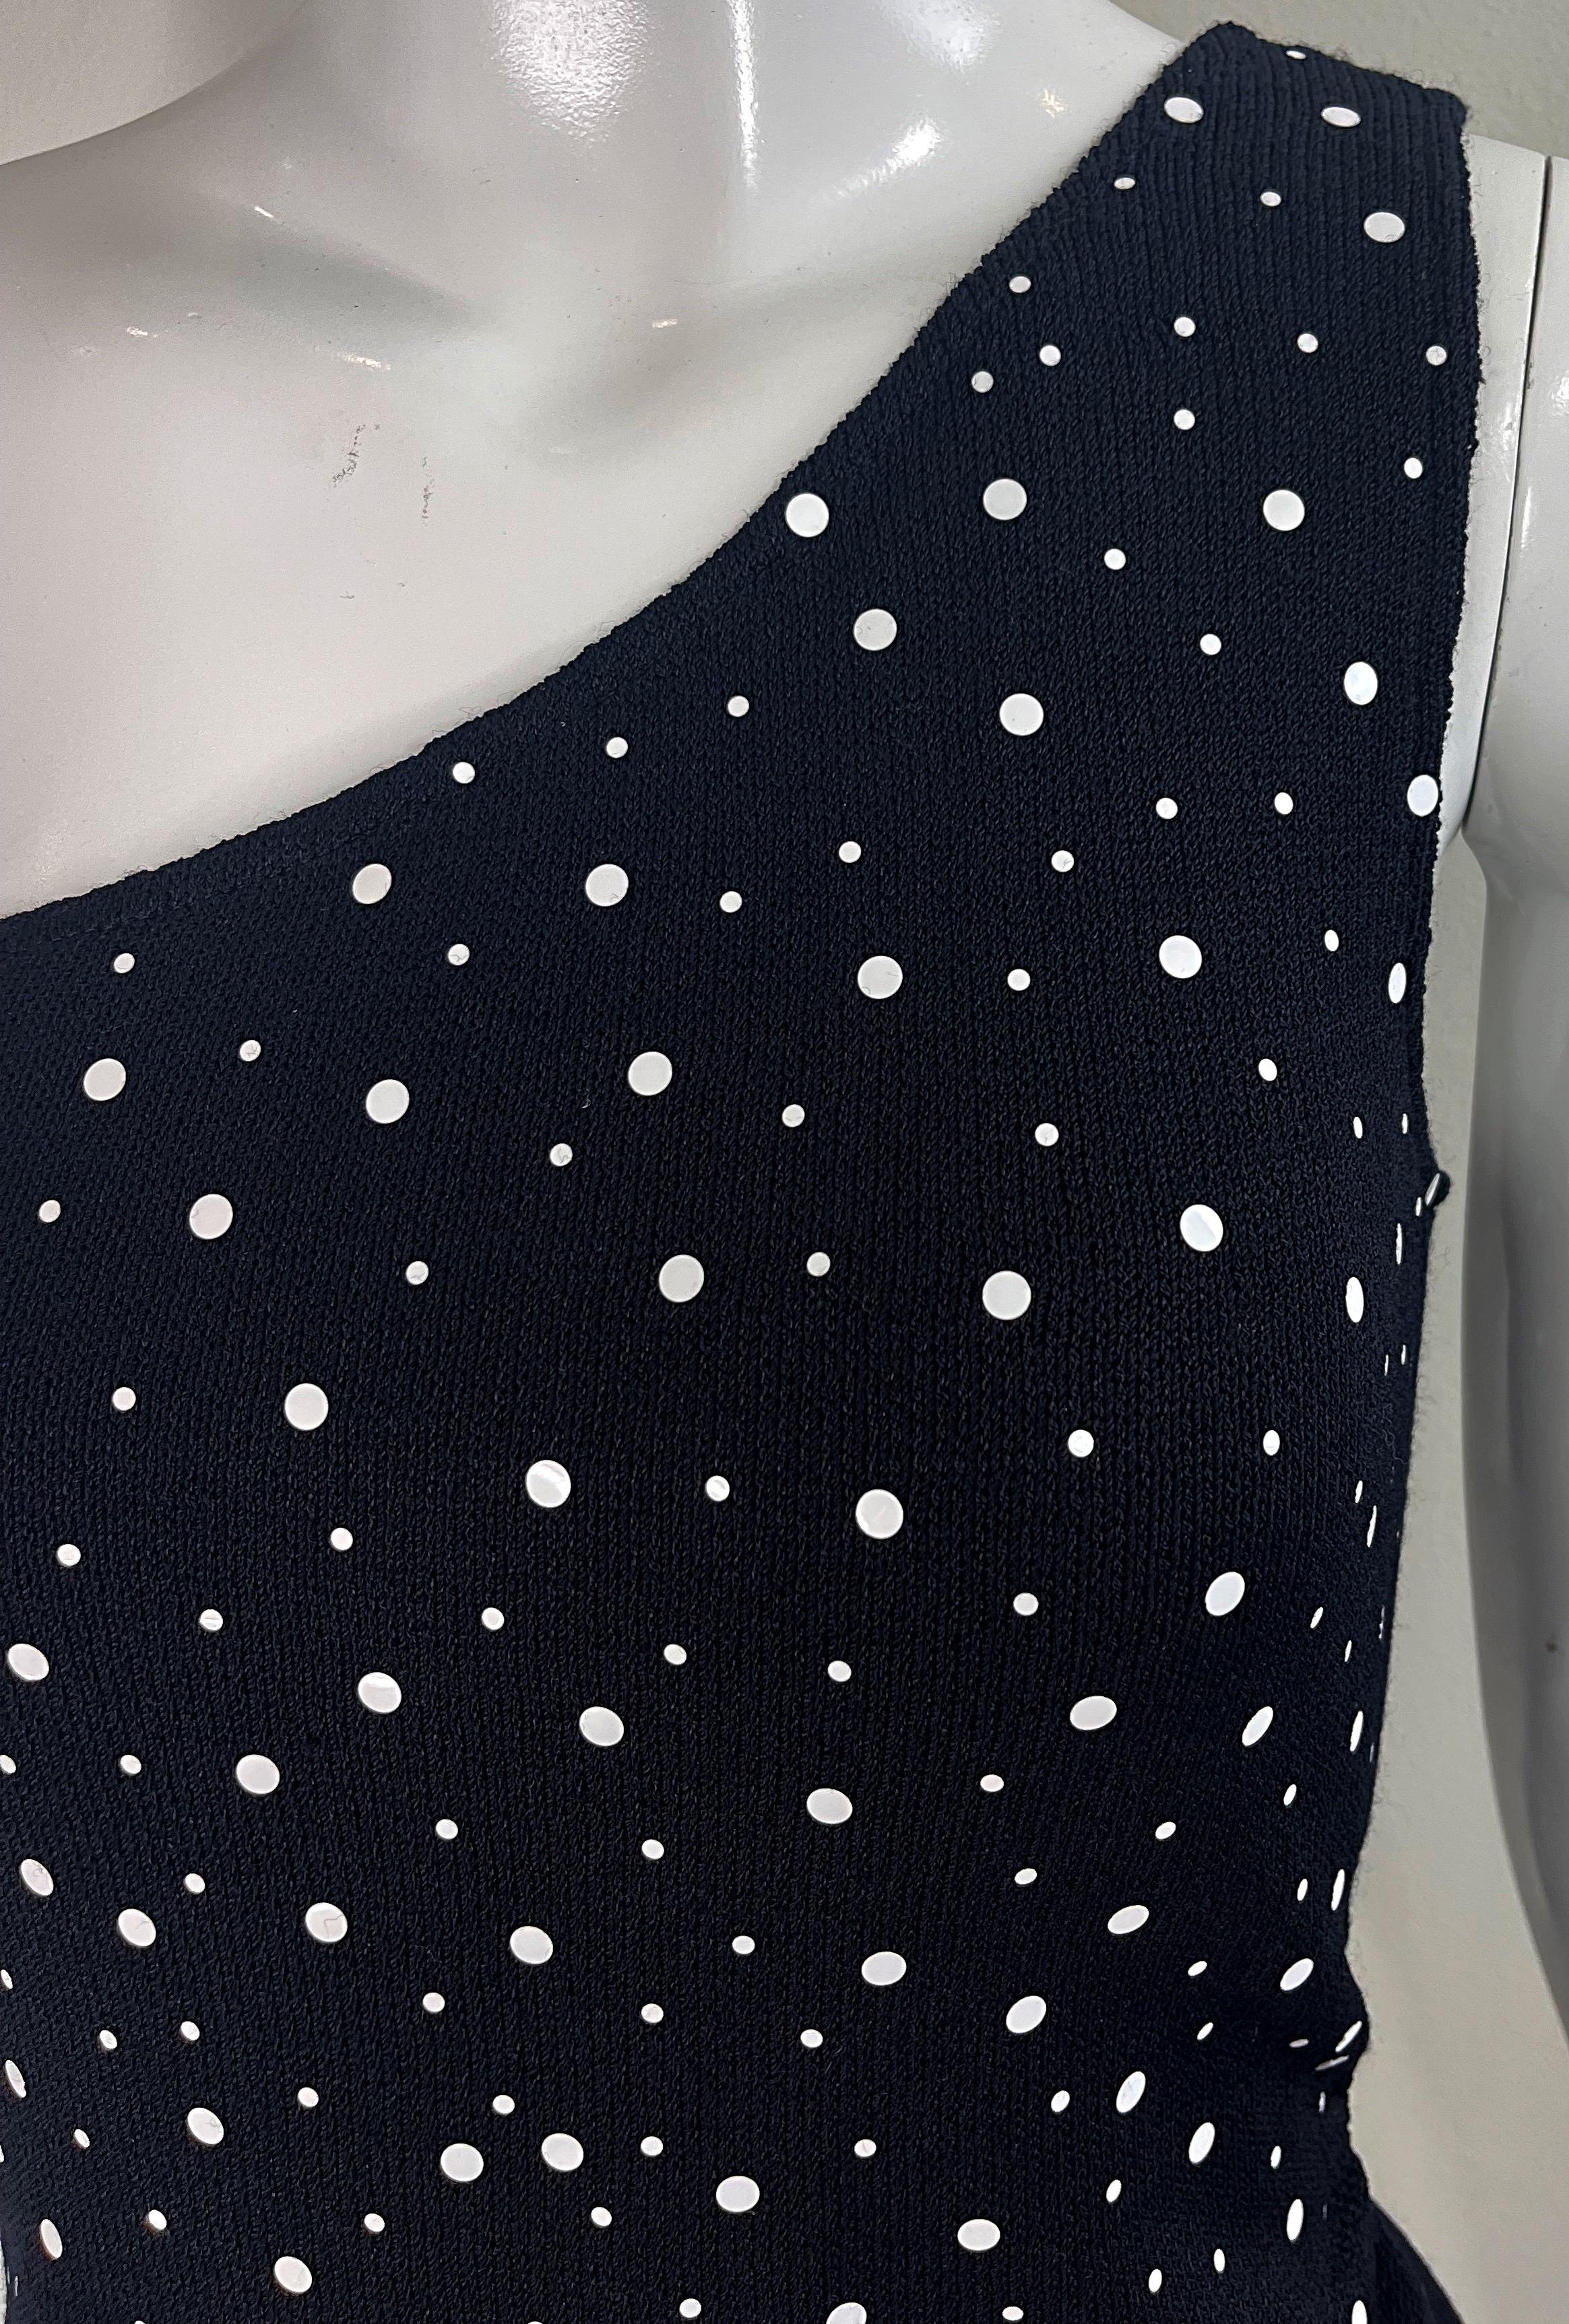 NWT 1990 I. Johns Collection by Marie Gray Size 8 Black White Polka Dot Top en vente 5